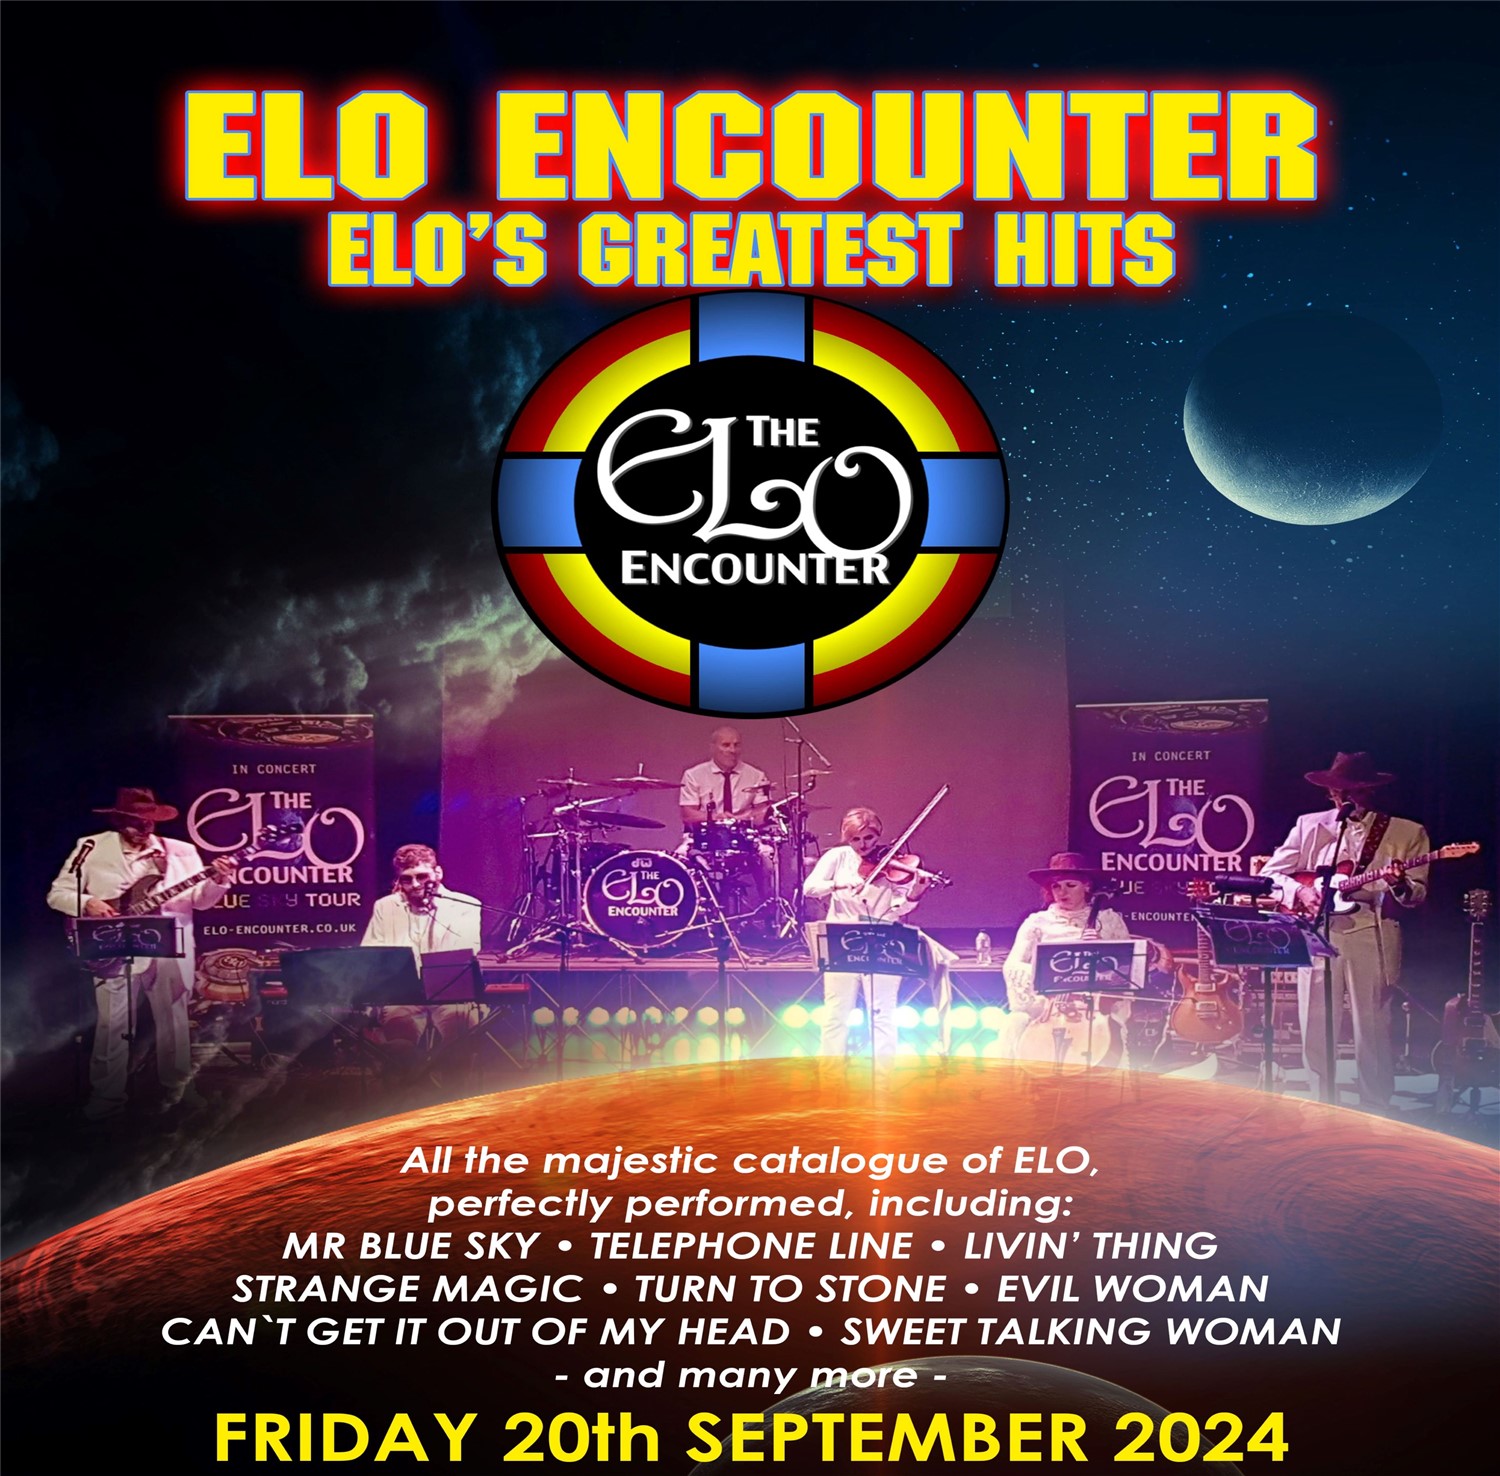 ELO Encounter ELOs Greatest Hits on Sep 20, 19:30@Standard capacity - Pick a seat, Buy tickets and Get information on Sutton Coldfield Town Hall 